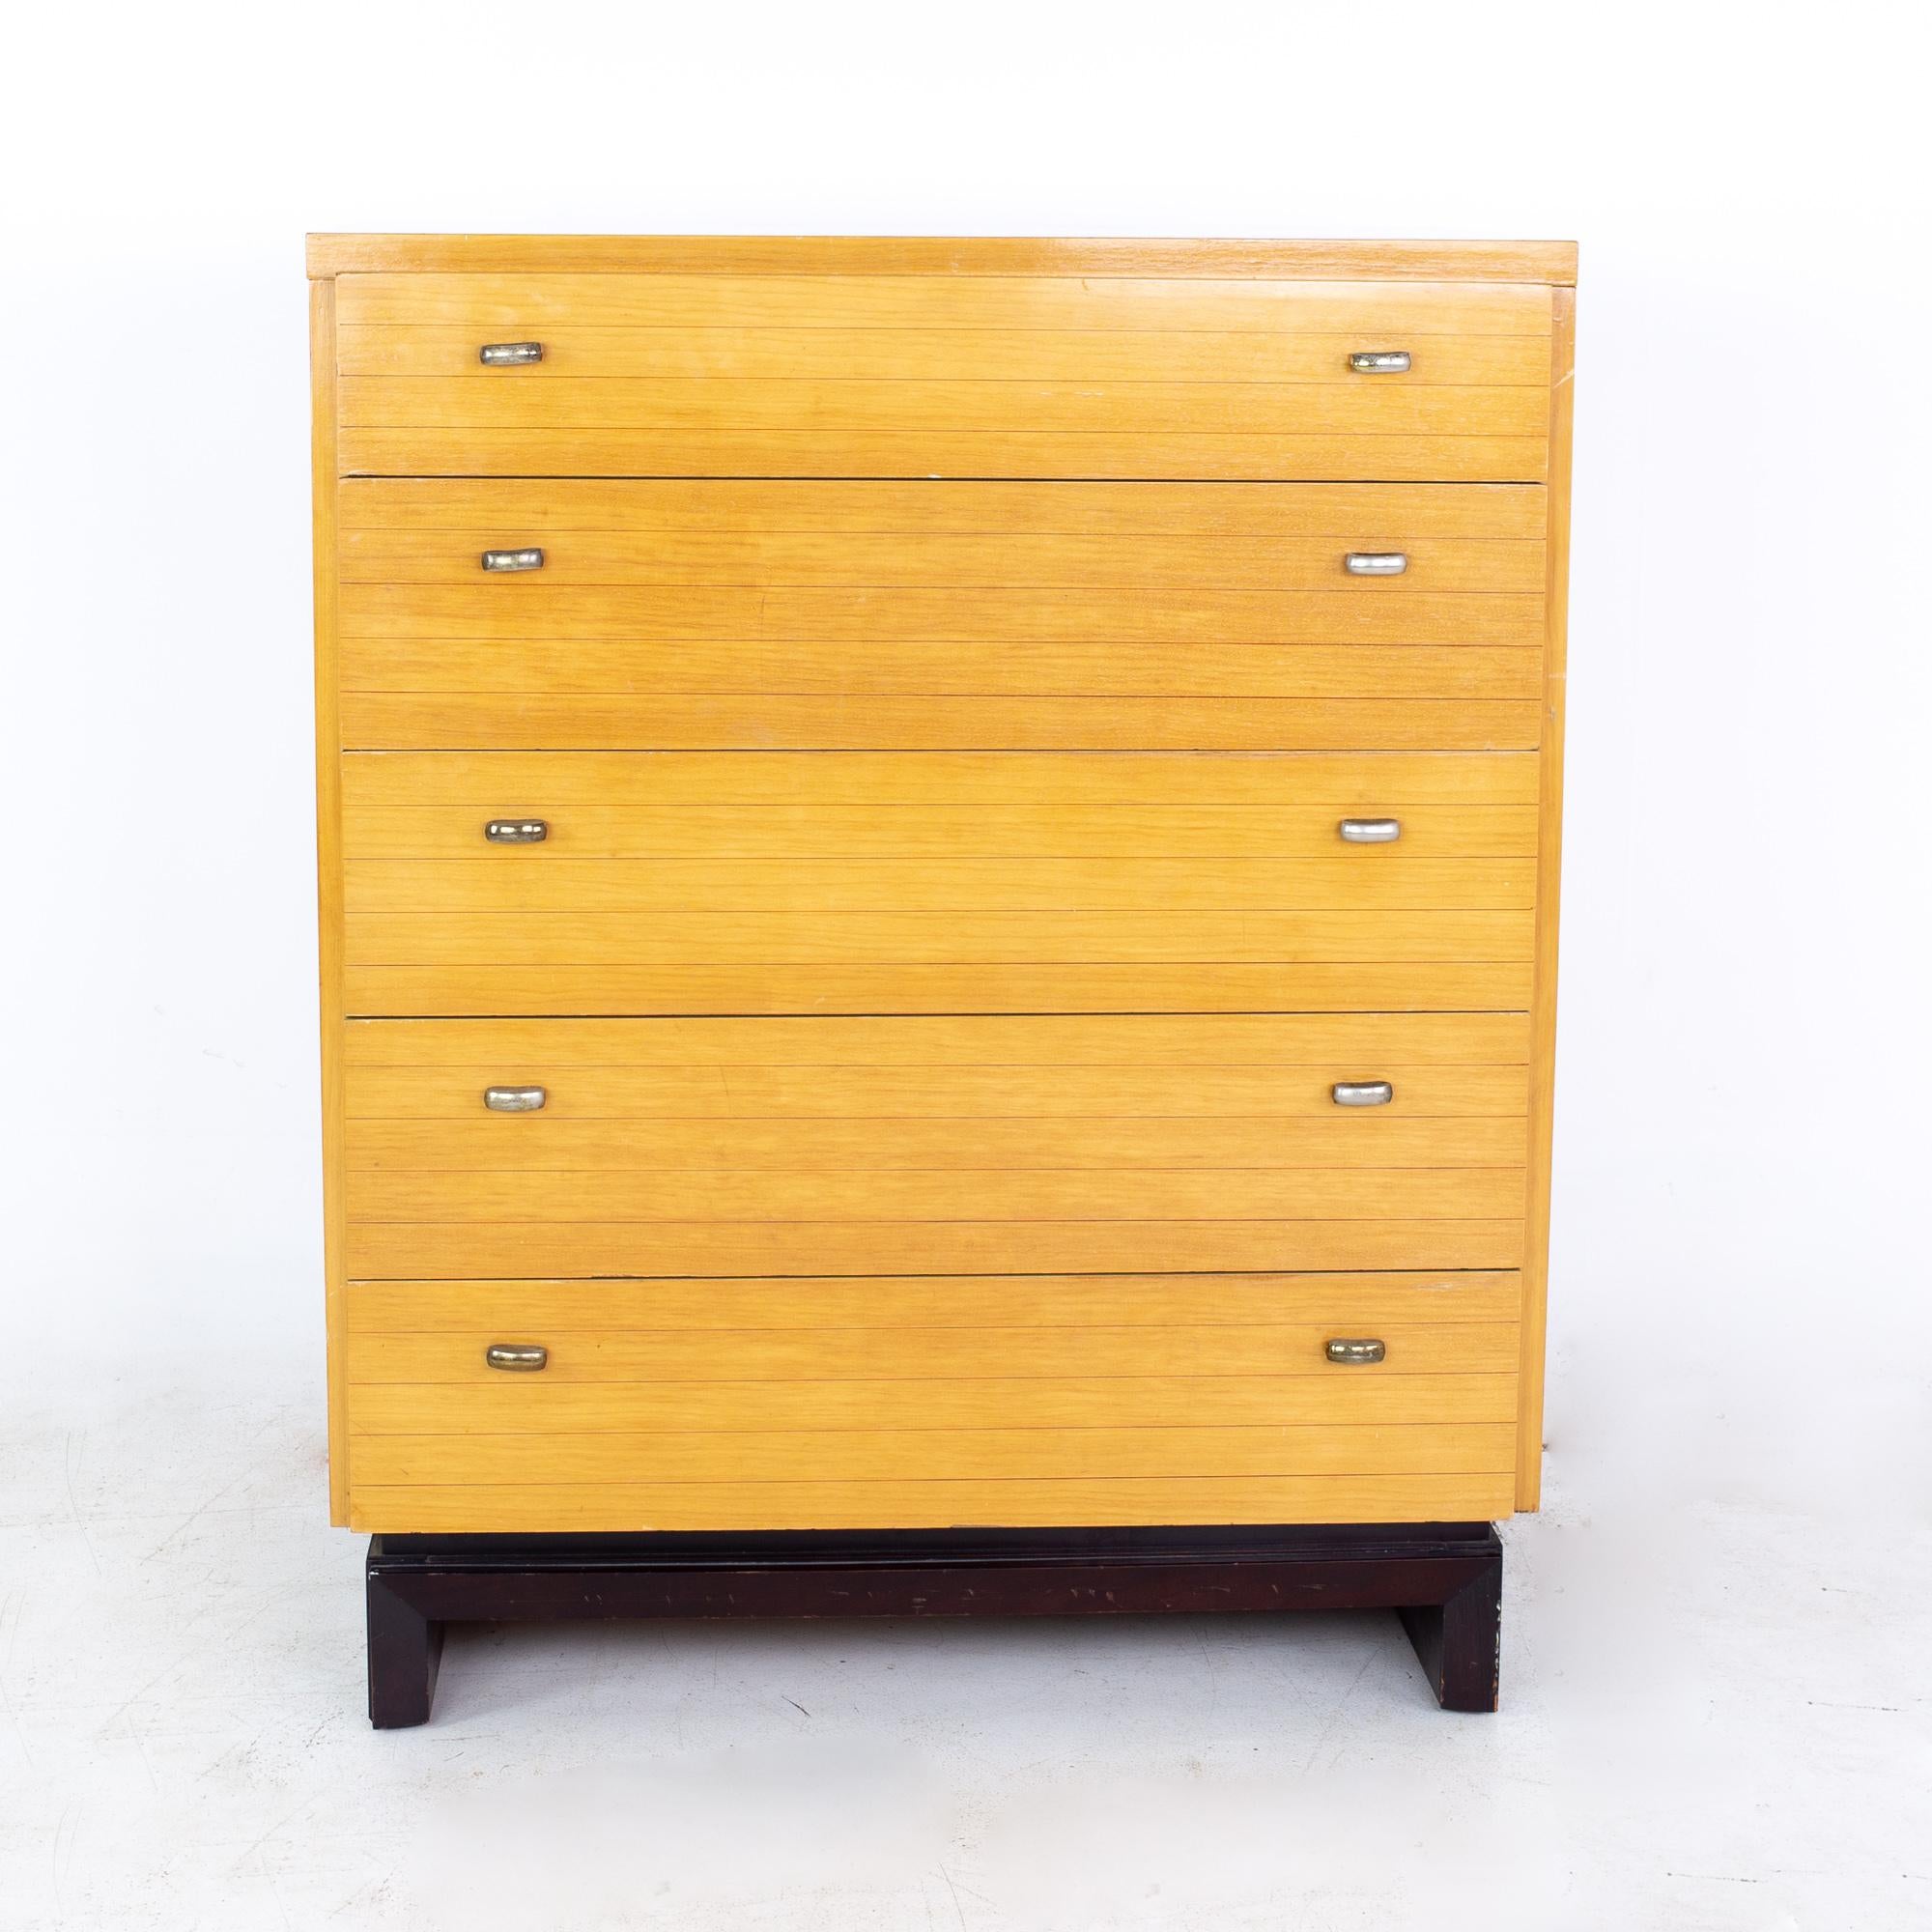 Milo Baughman style American of Martinsville mid century blonde highboy dresser
Dresser measures: 36 wide x 20.5 deep x 44 inches high

All pieces of furniture can be had in what we call restored vintage condition. That means the piece is